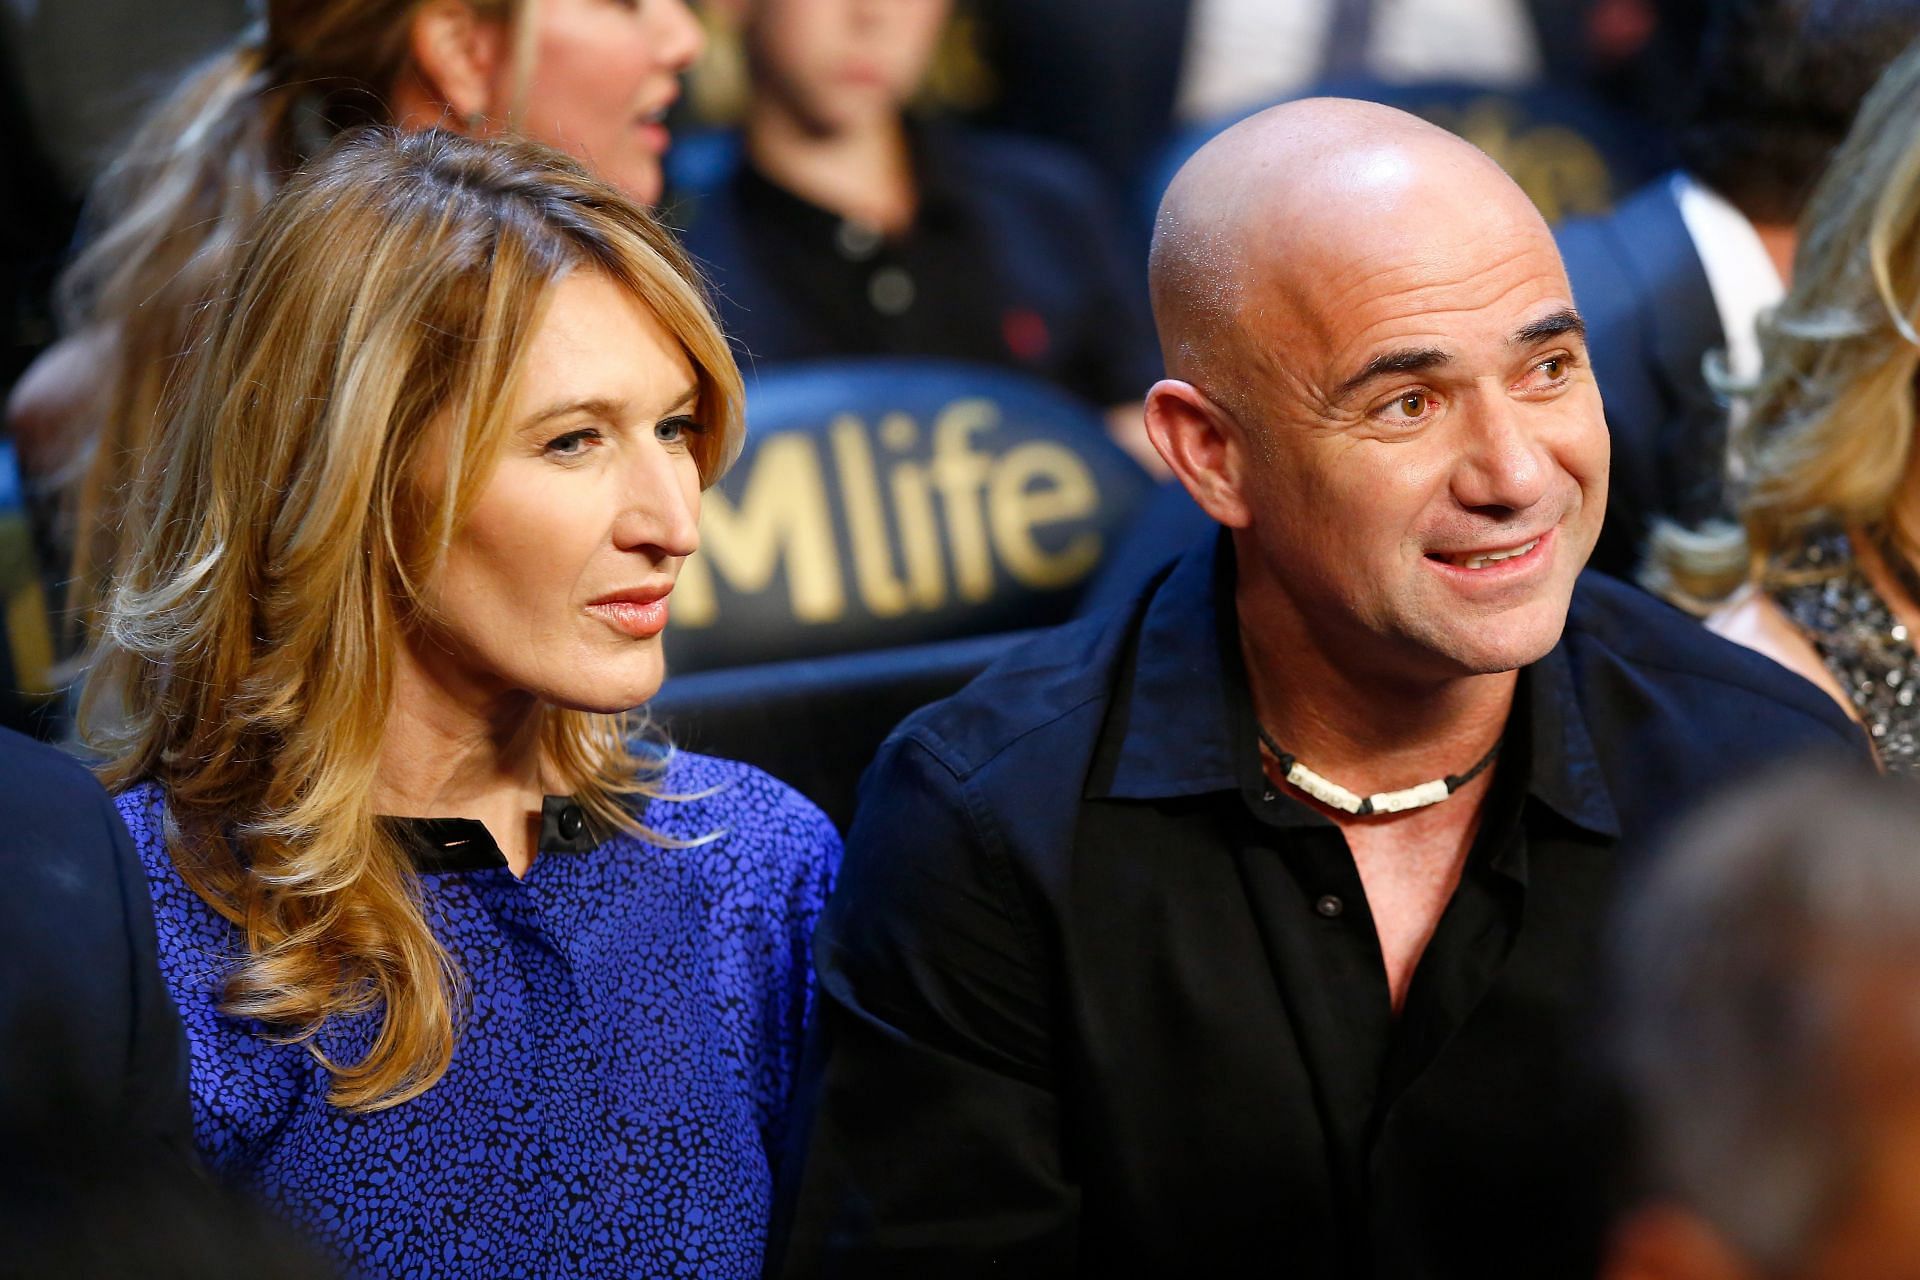 Steffi Graf (L) and Andre Agassi (R) at Las Vegas&#039; MGM Grand Garden Arena in 2015